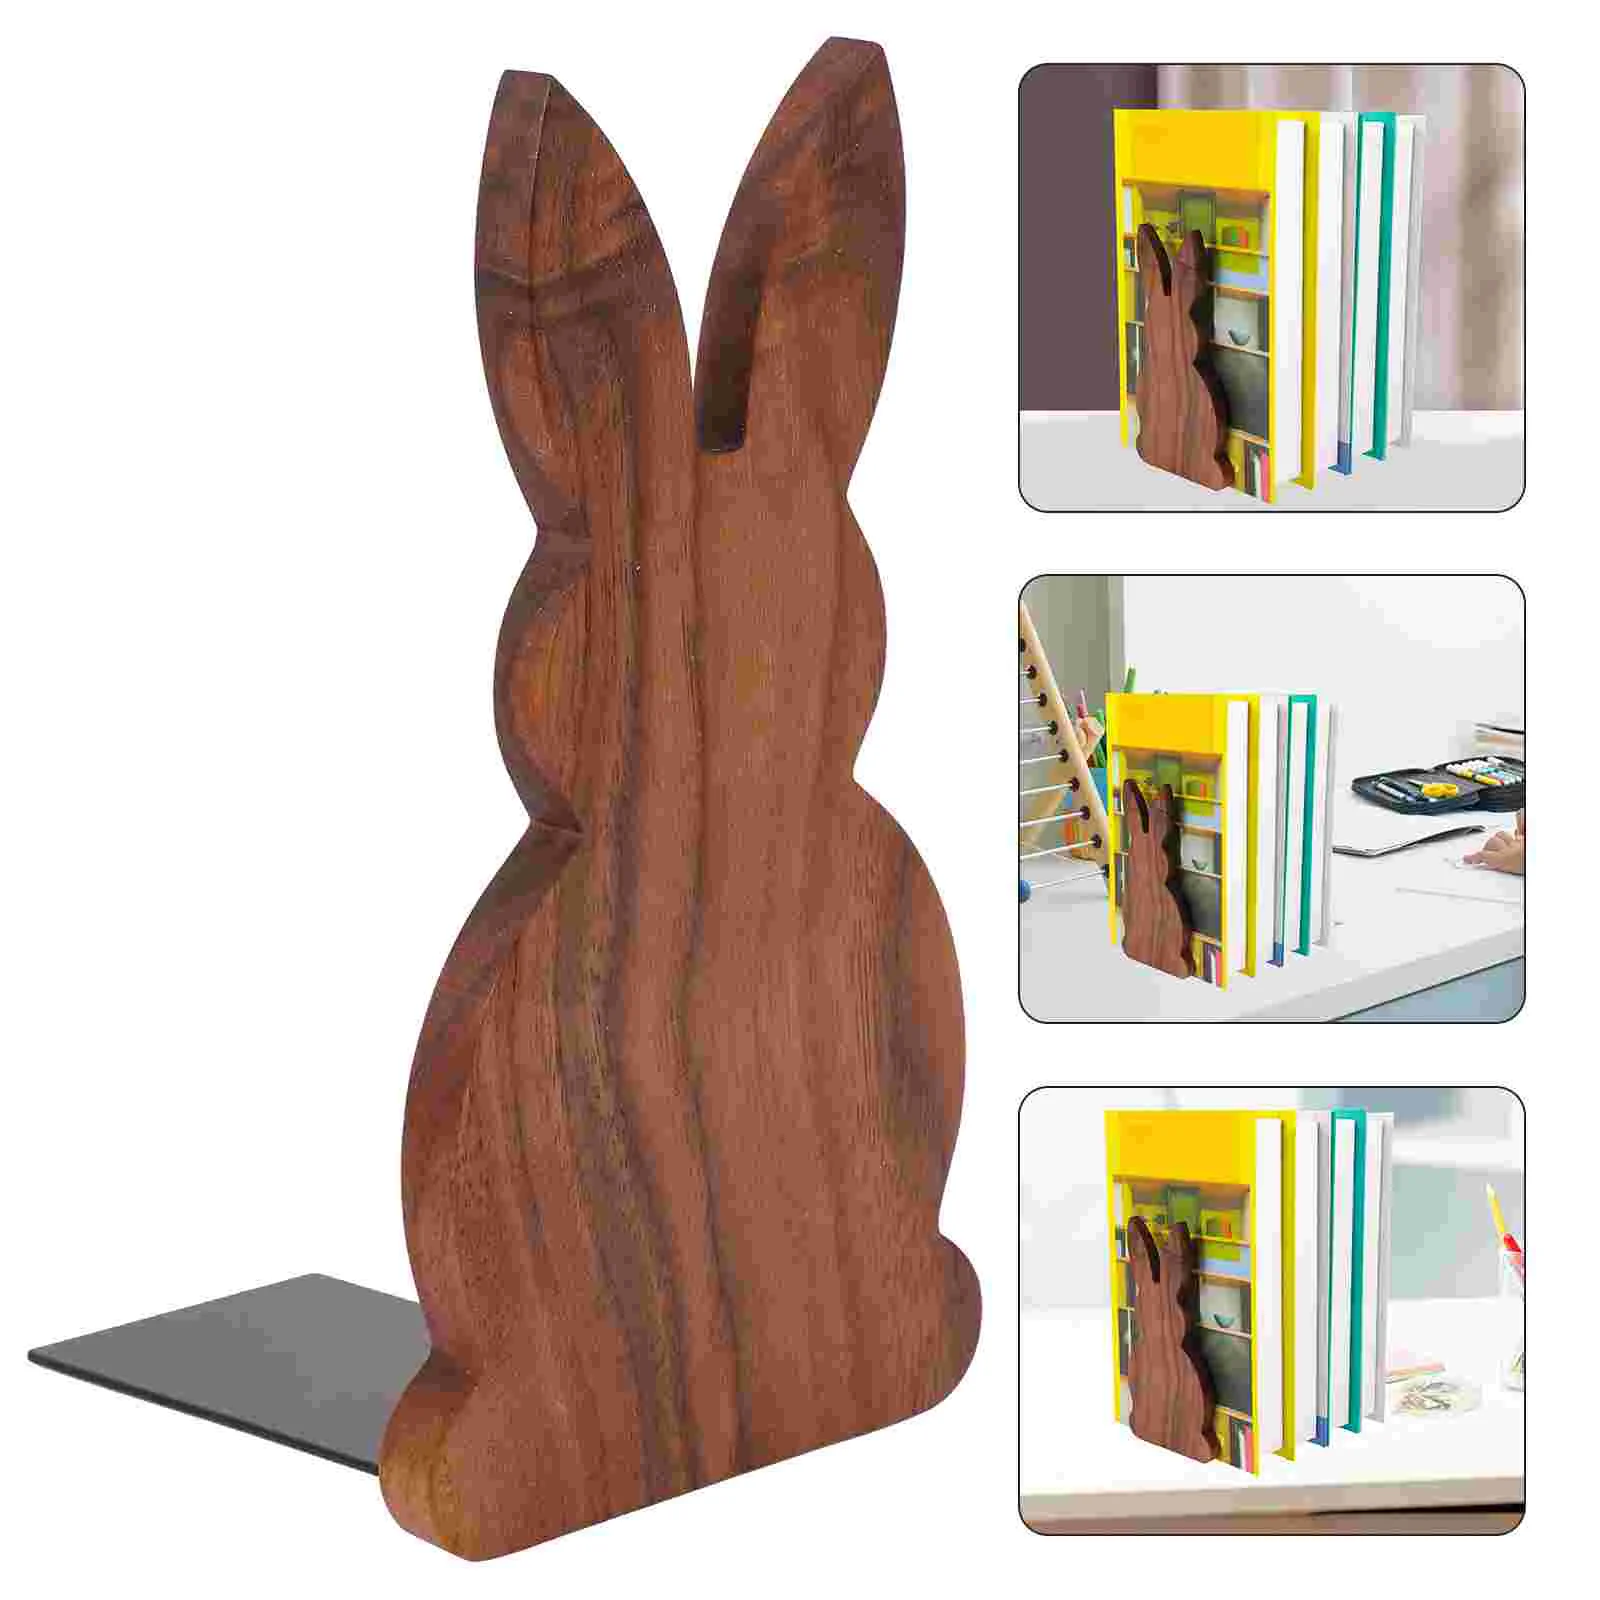 Bunny Decor Wood Book Ends Woodsy Decor Office Bookends Desktop Decor Book Display Holder Simple Rabbit Bookend